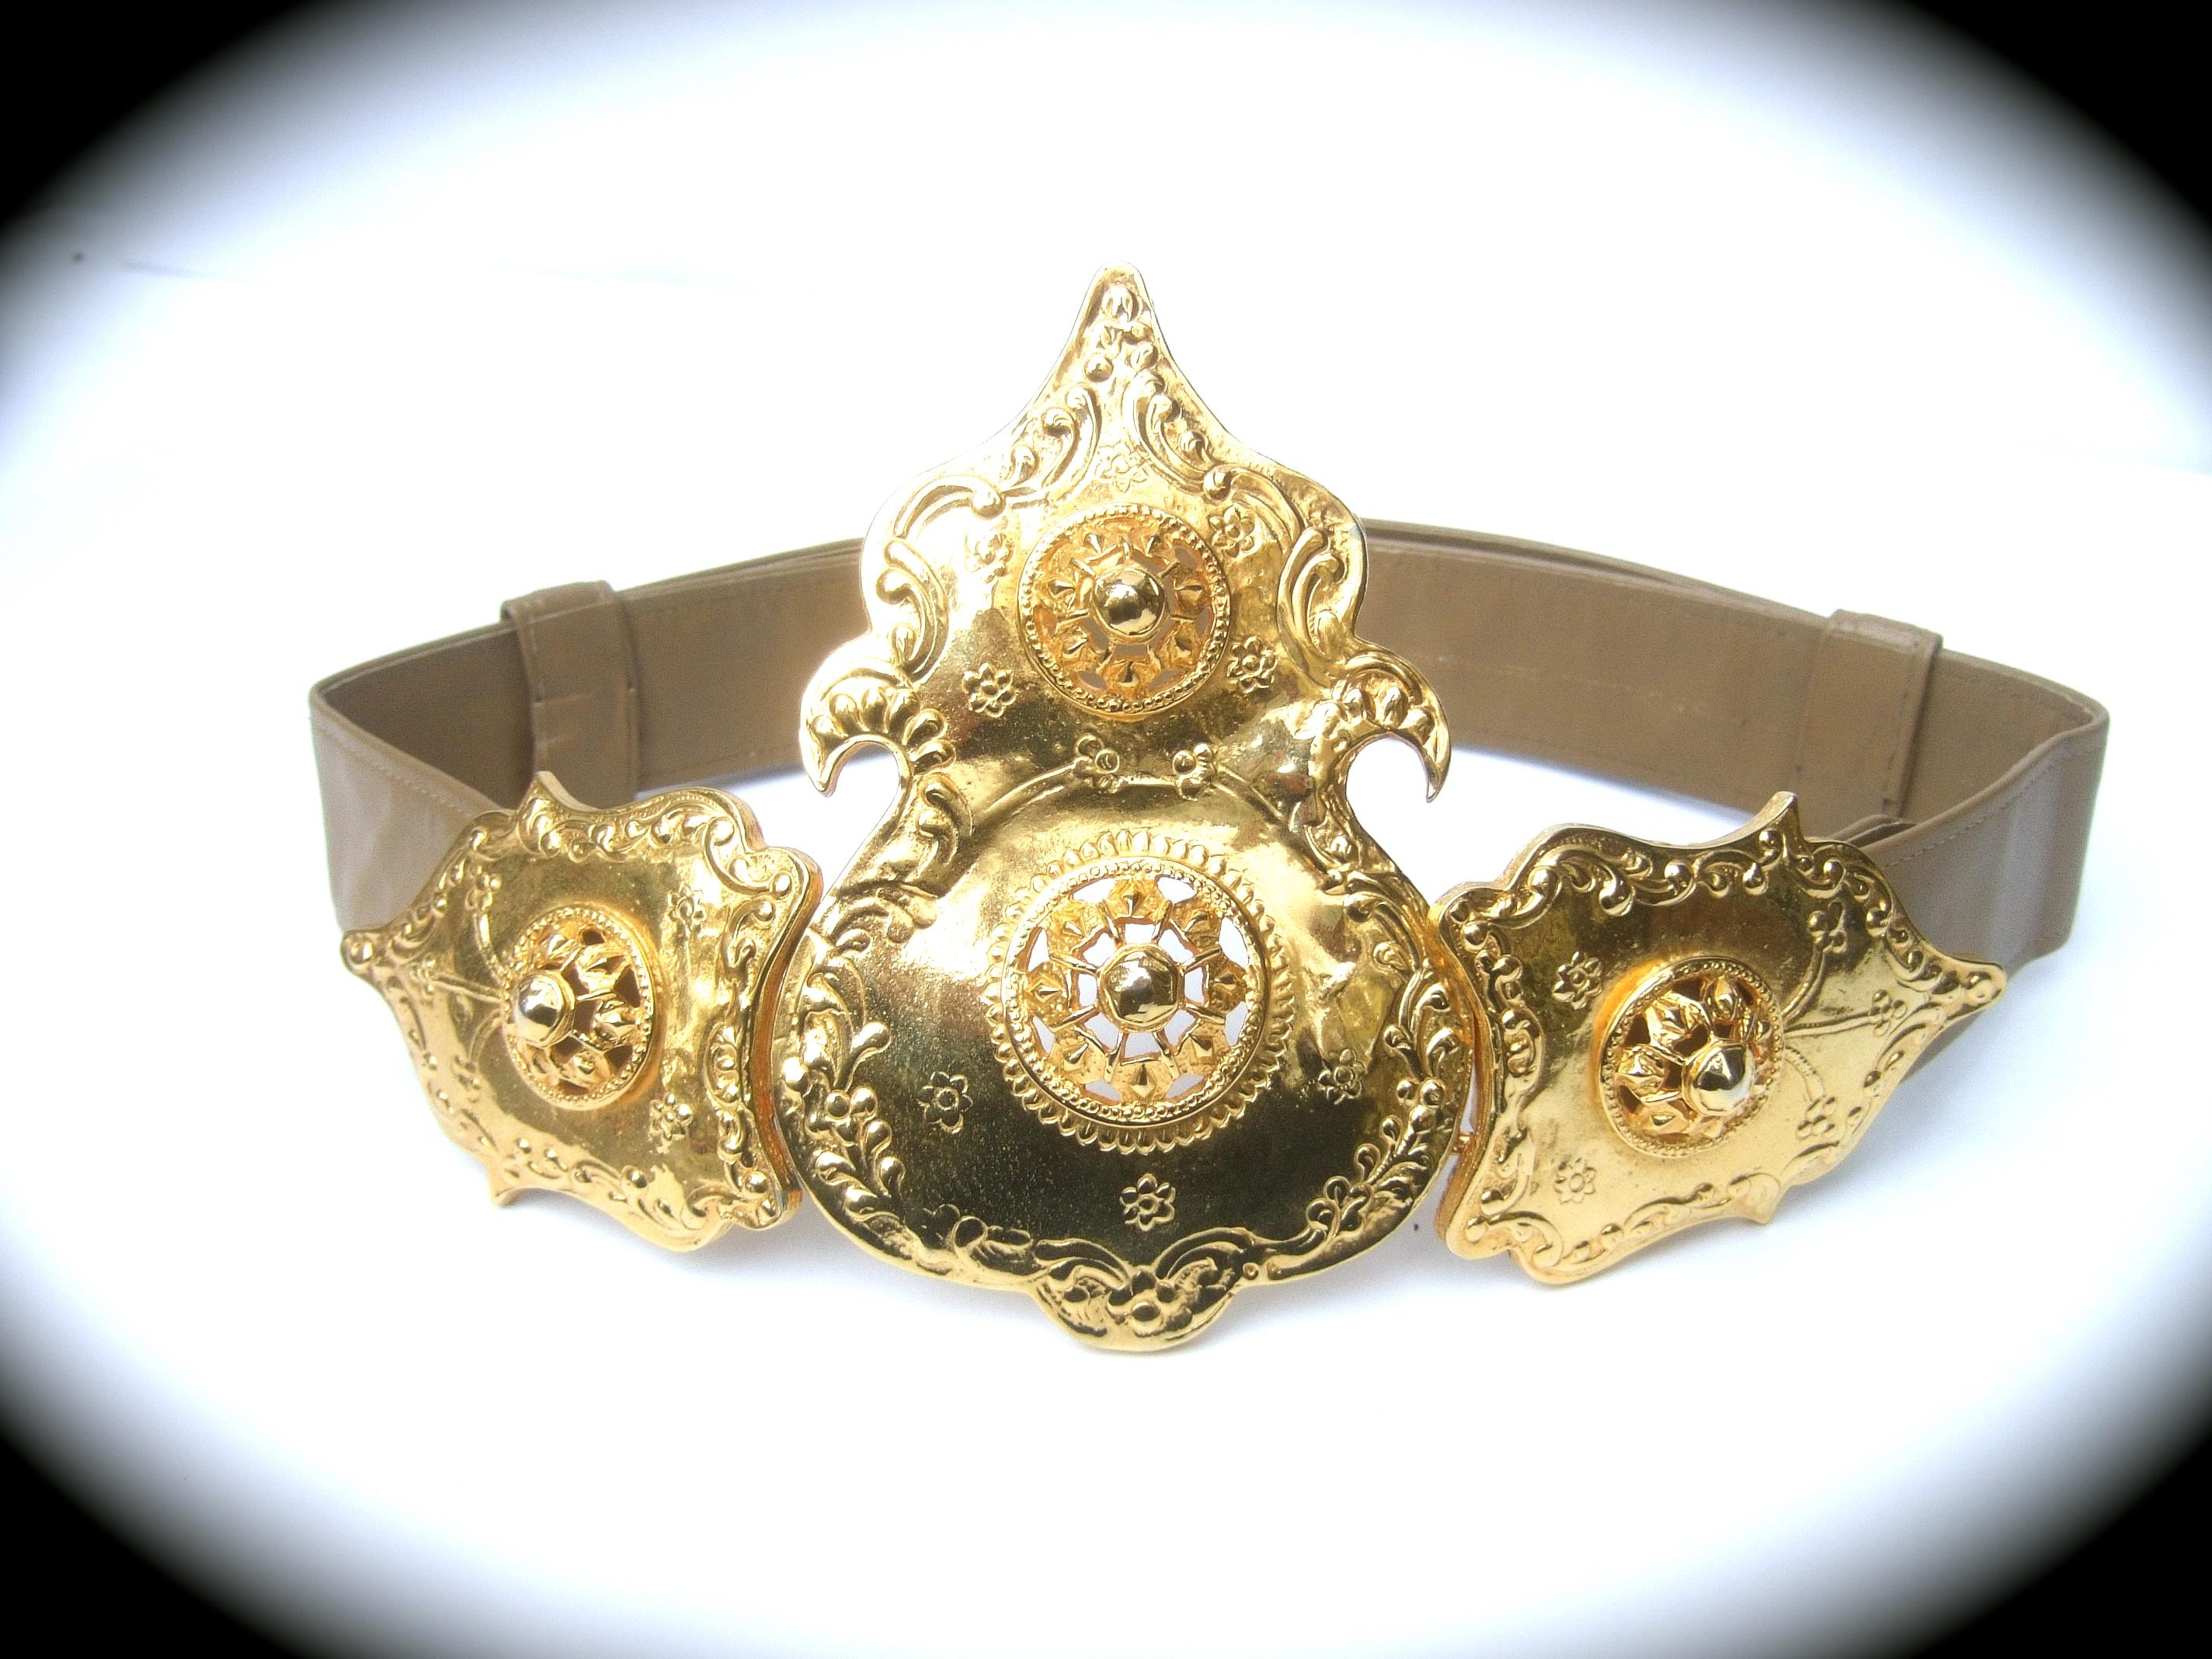 Alexis Kirk Massive Etruscan Gold Buckle Statement Belt c 1980s In Good Condition For Sale In University City, MO